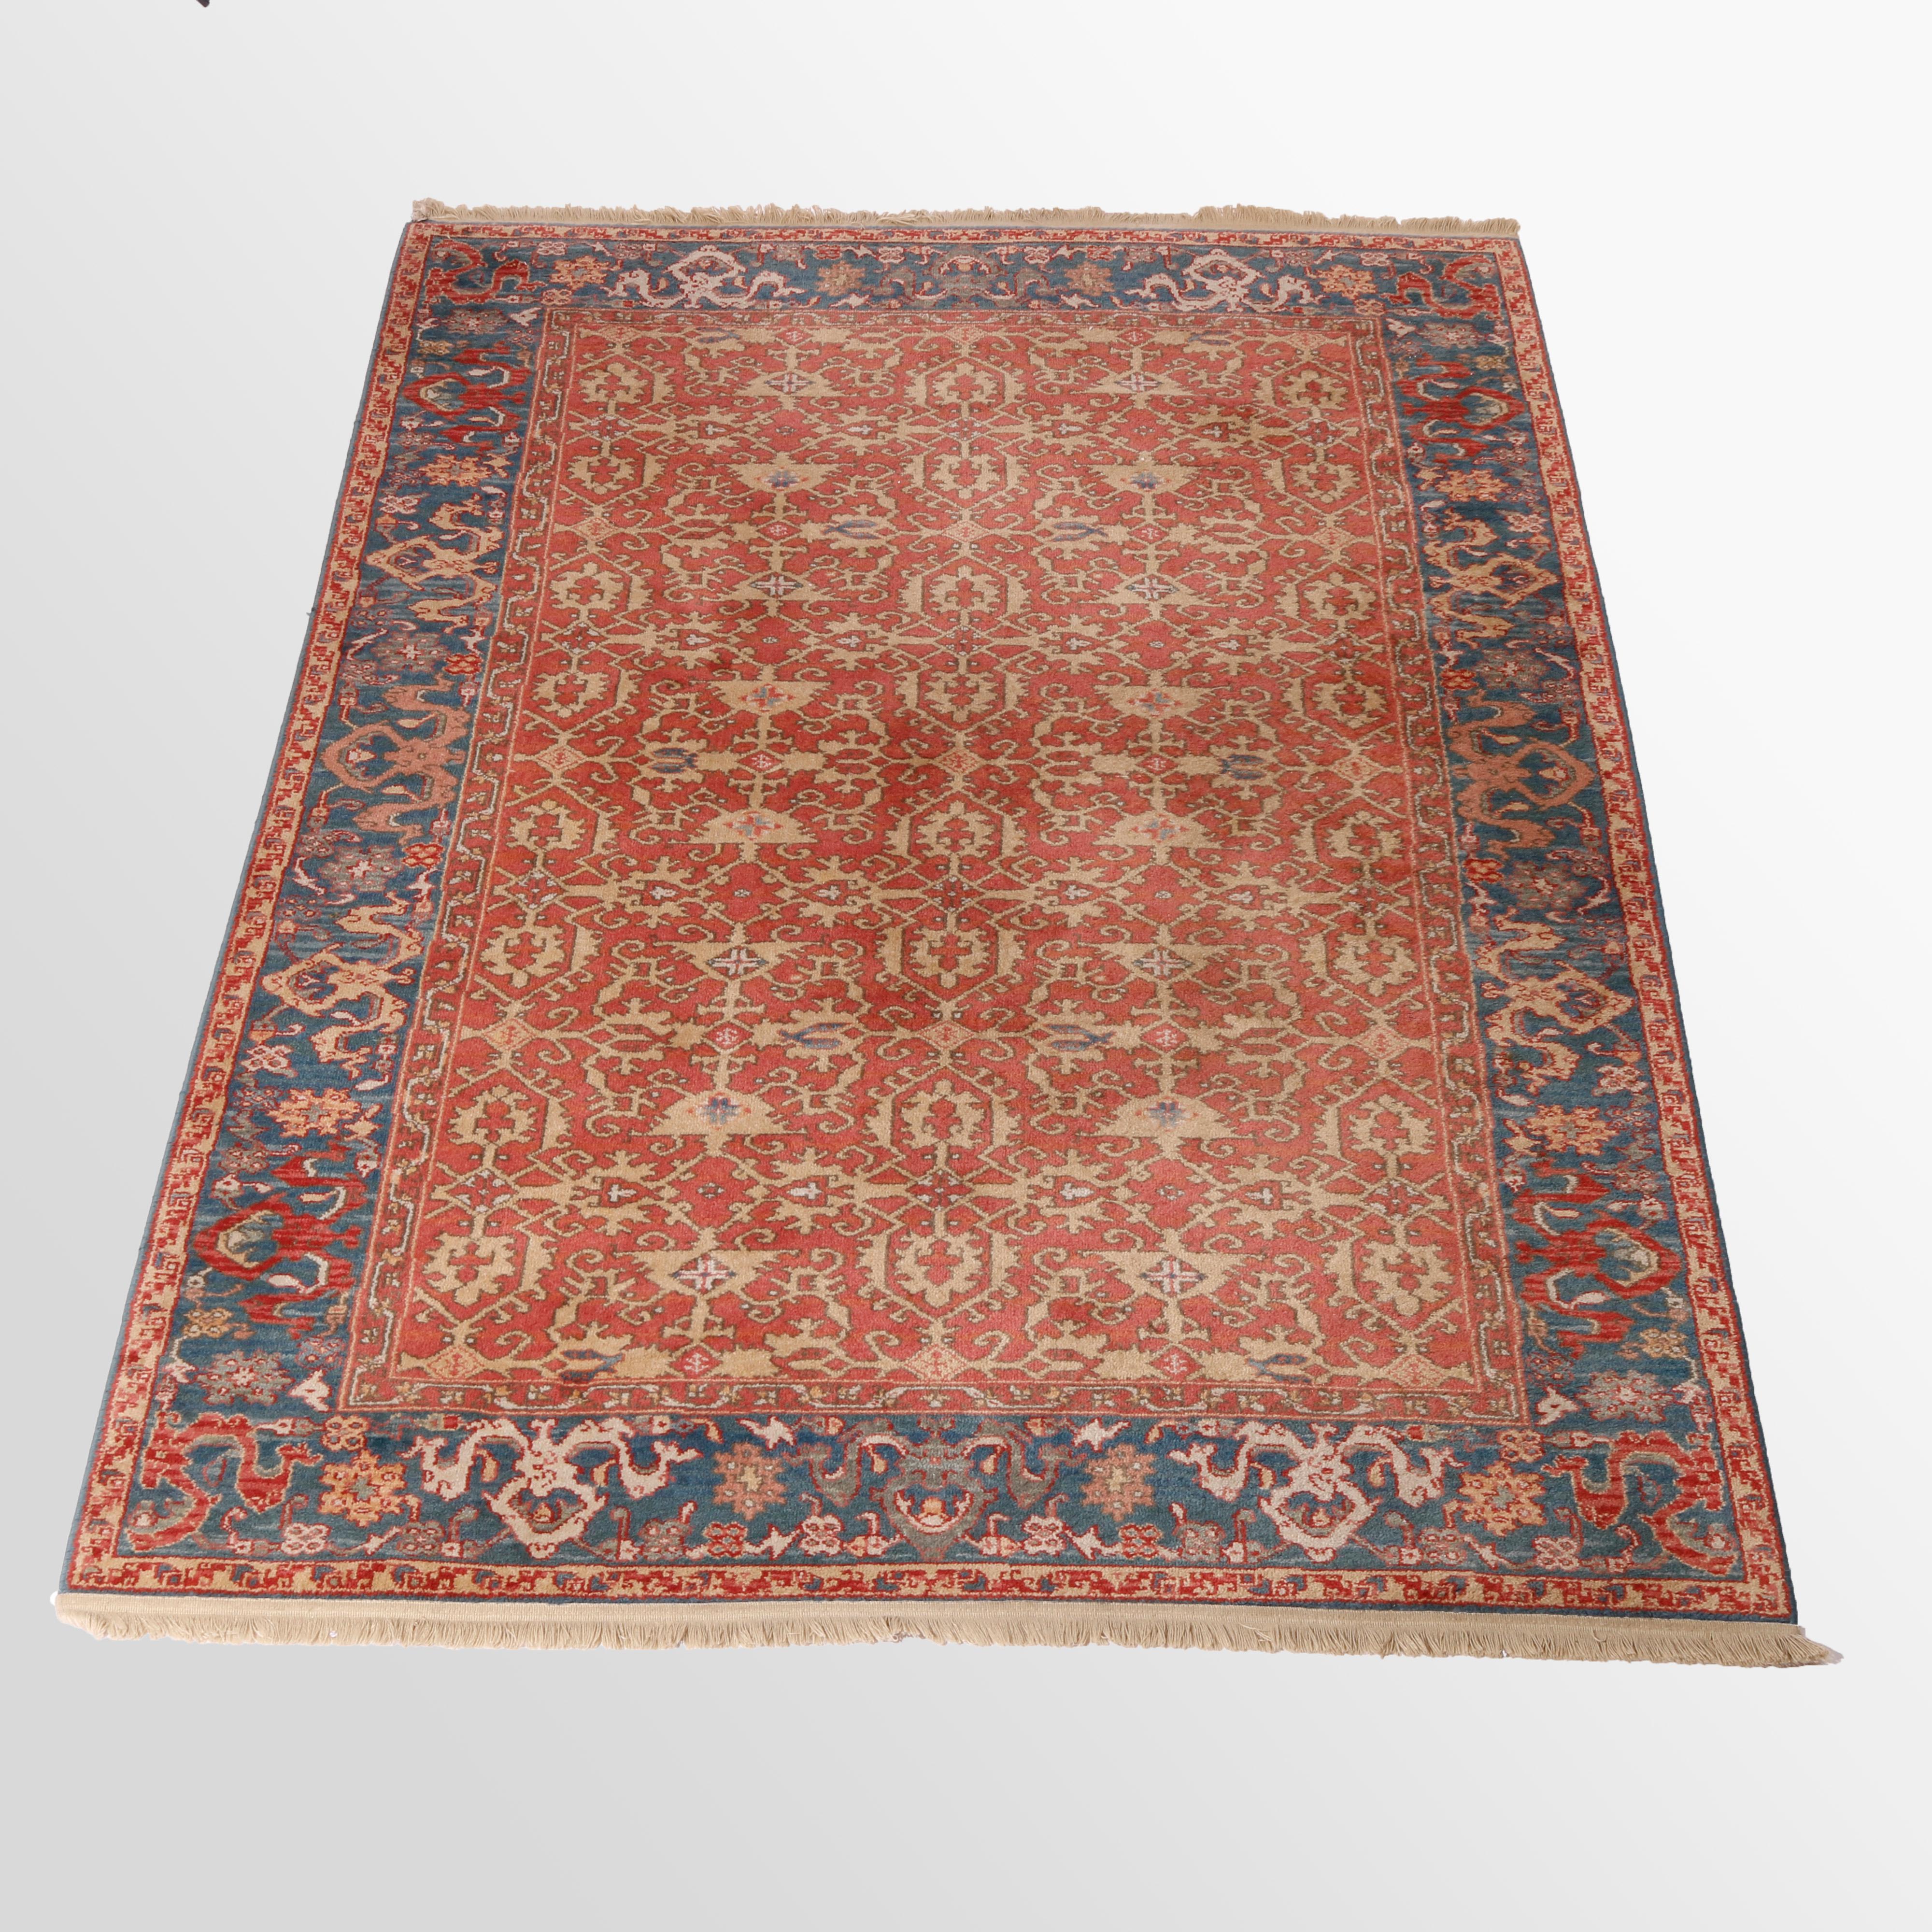 A Colonial Williamsburg Karastan Ushak oriental rug in Pattern 552 offers wool construction with stylized floral and foliate allover design, maker label as photographed, 5.8' X 8.11', 20th century

Measures - 111''L x 68''W x .5''D.